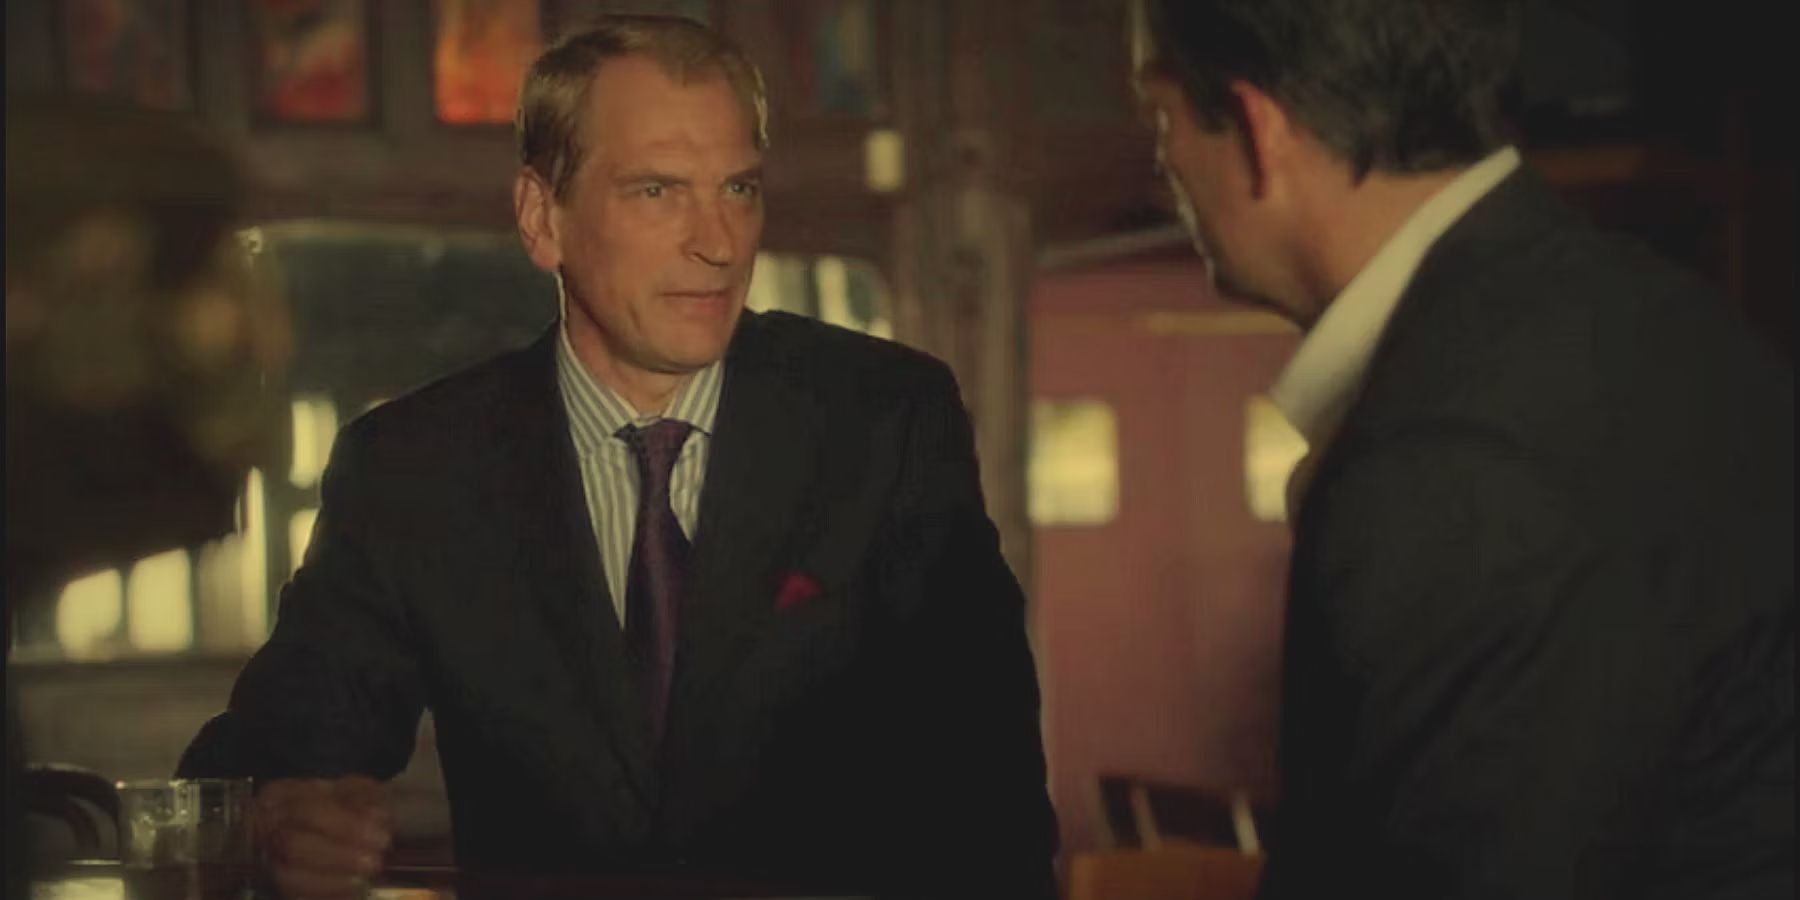 Julian Sands speaks to Reese as Wesley in Person of Interest